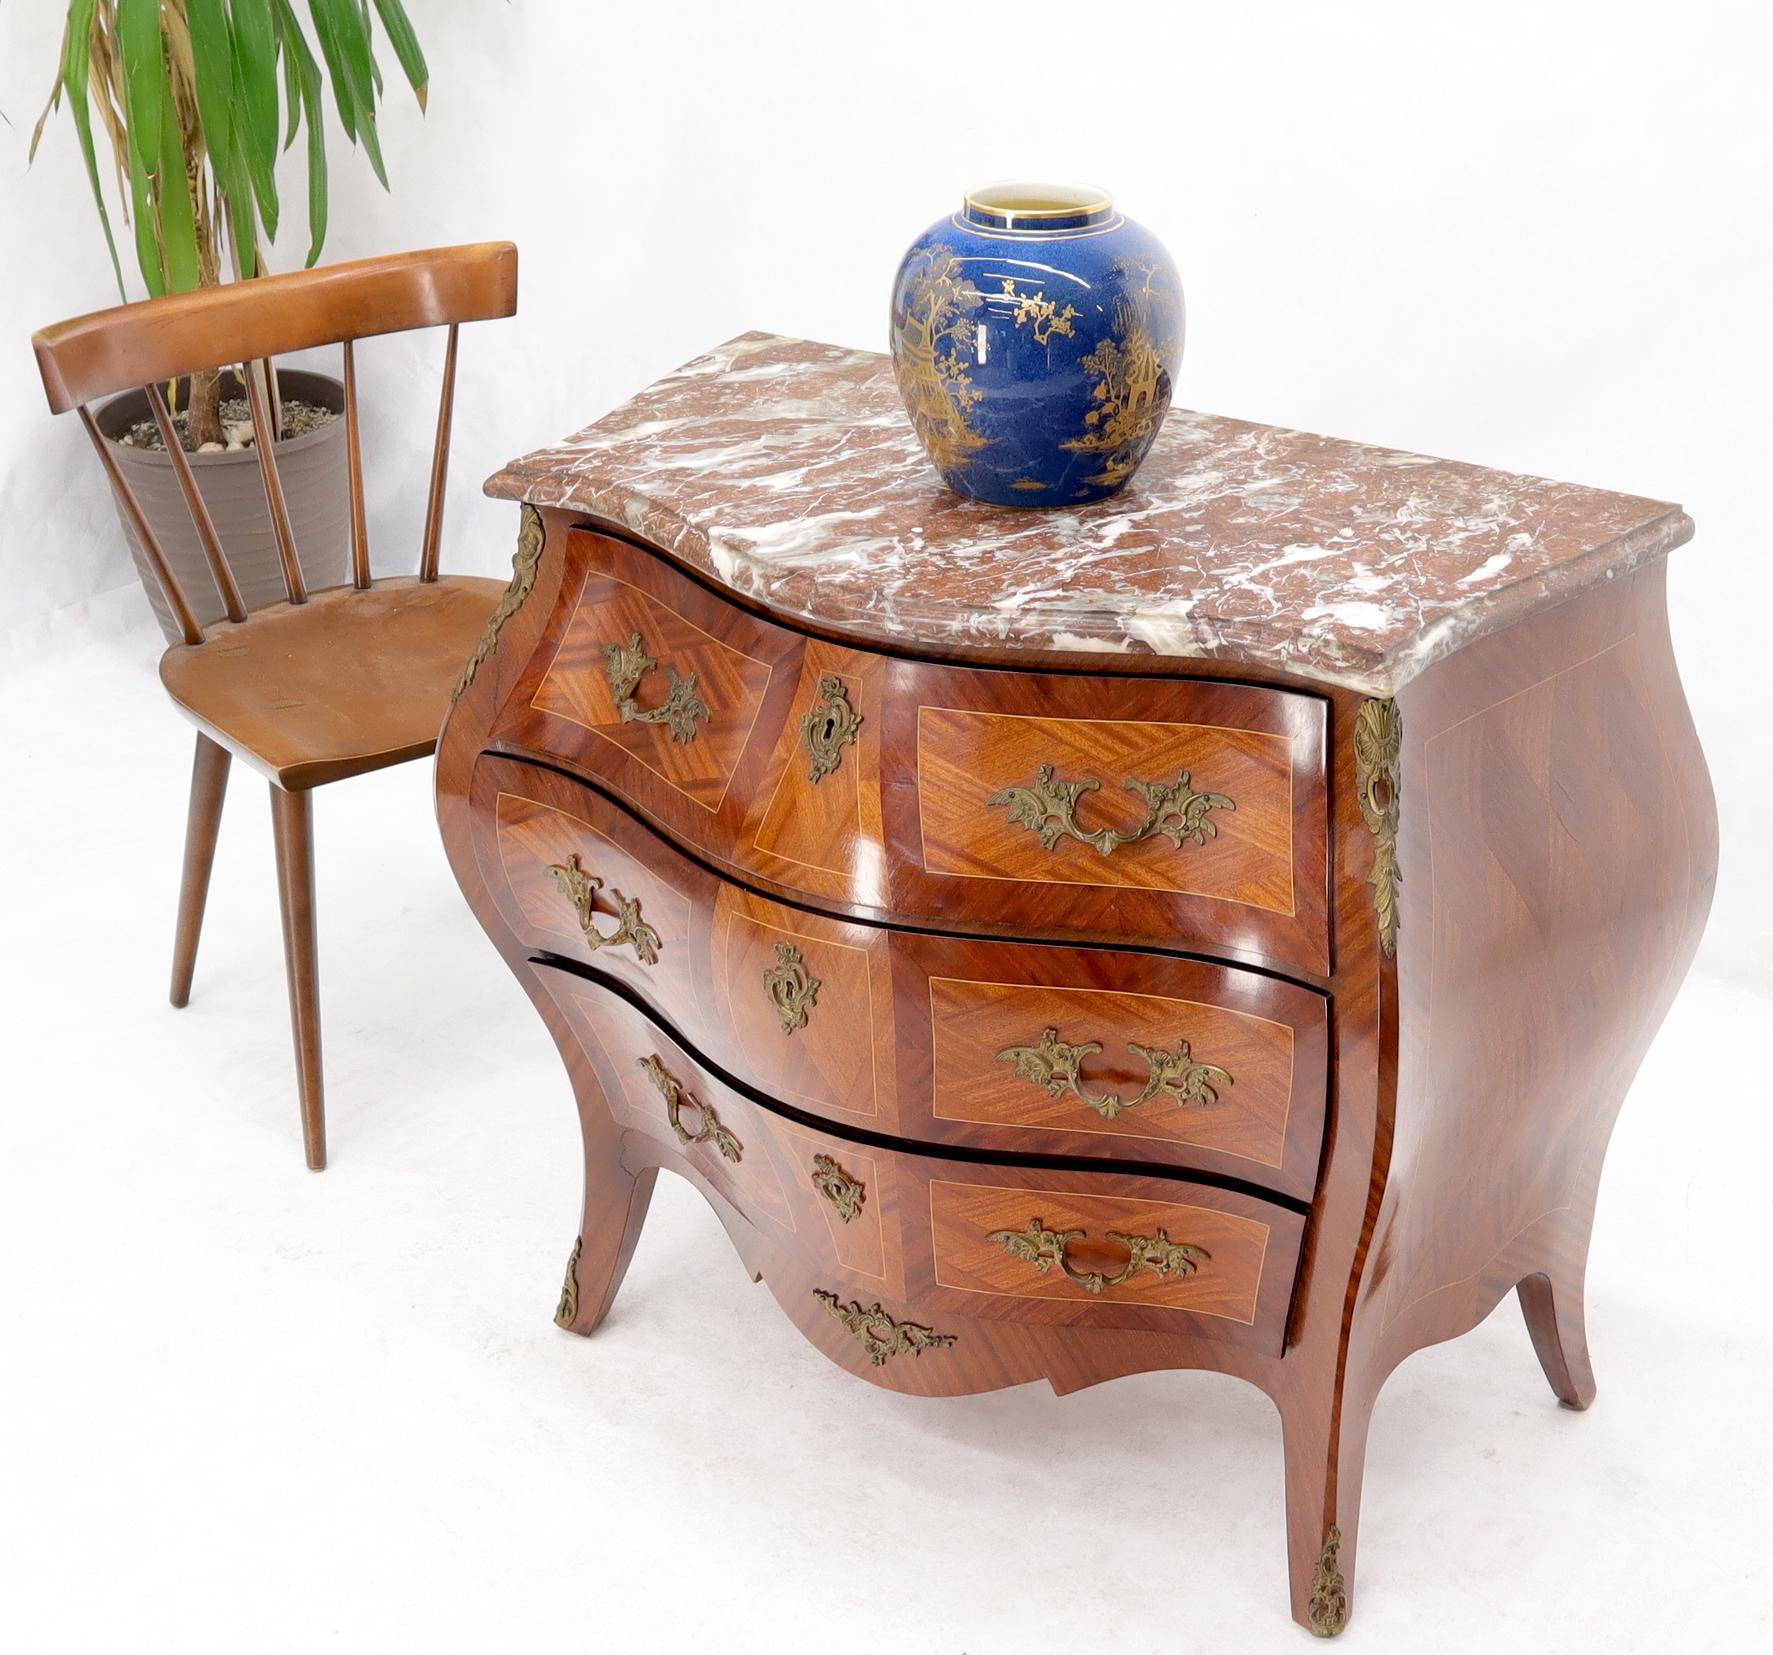 Stunning rouge marble-top French inlayed wood dresser with significant bronze ormolu. Very nice decorative piece.